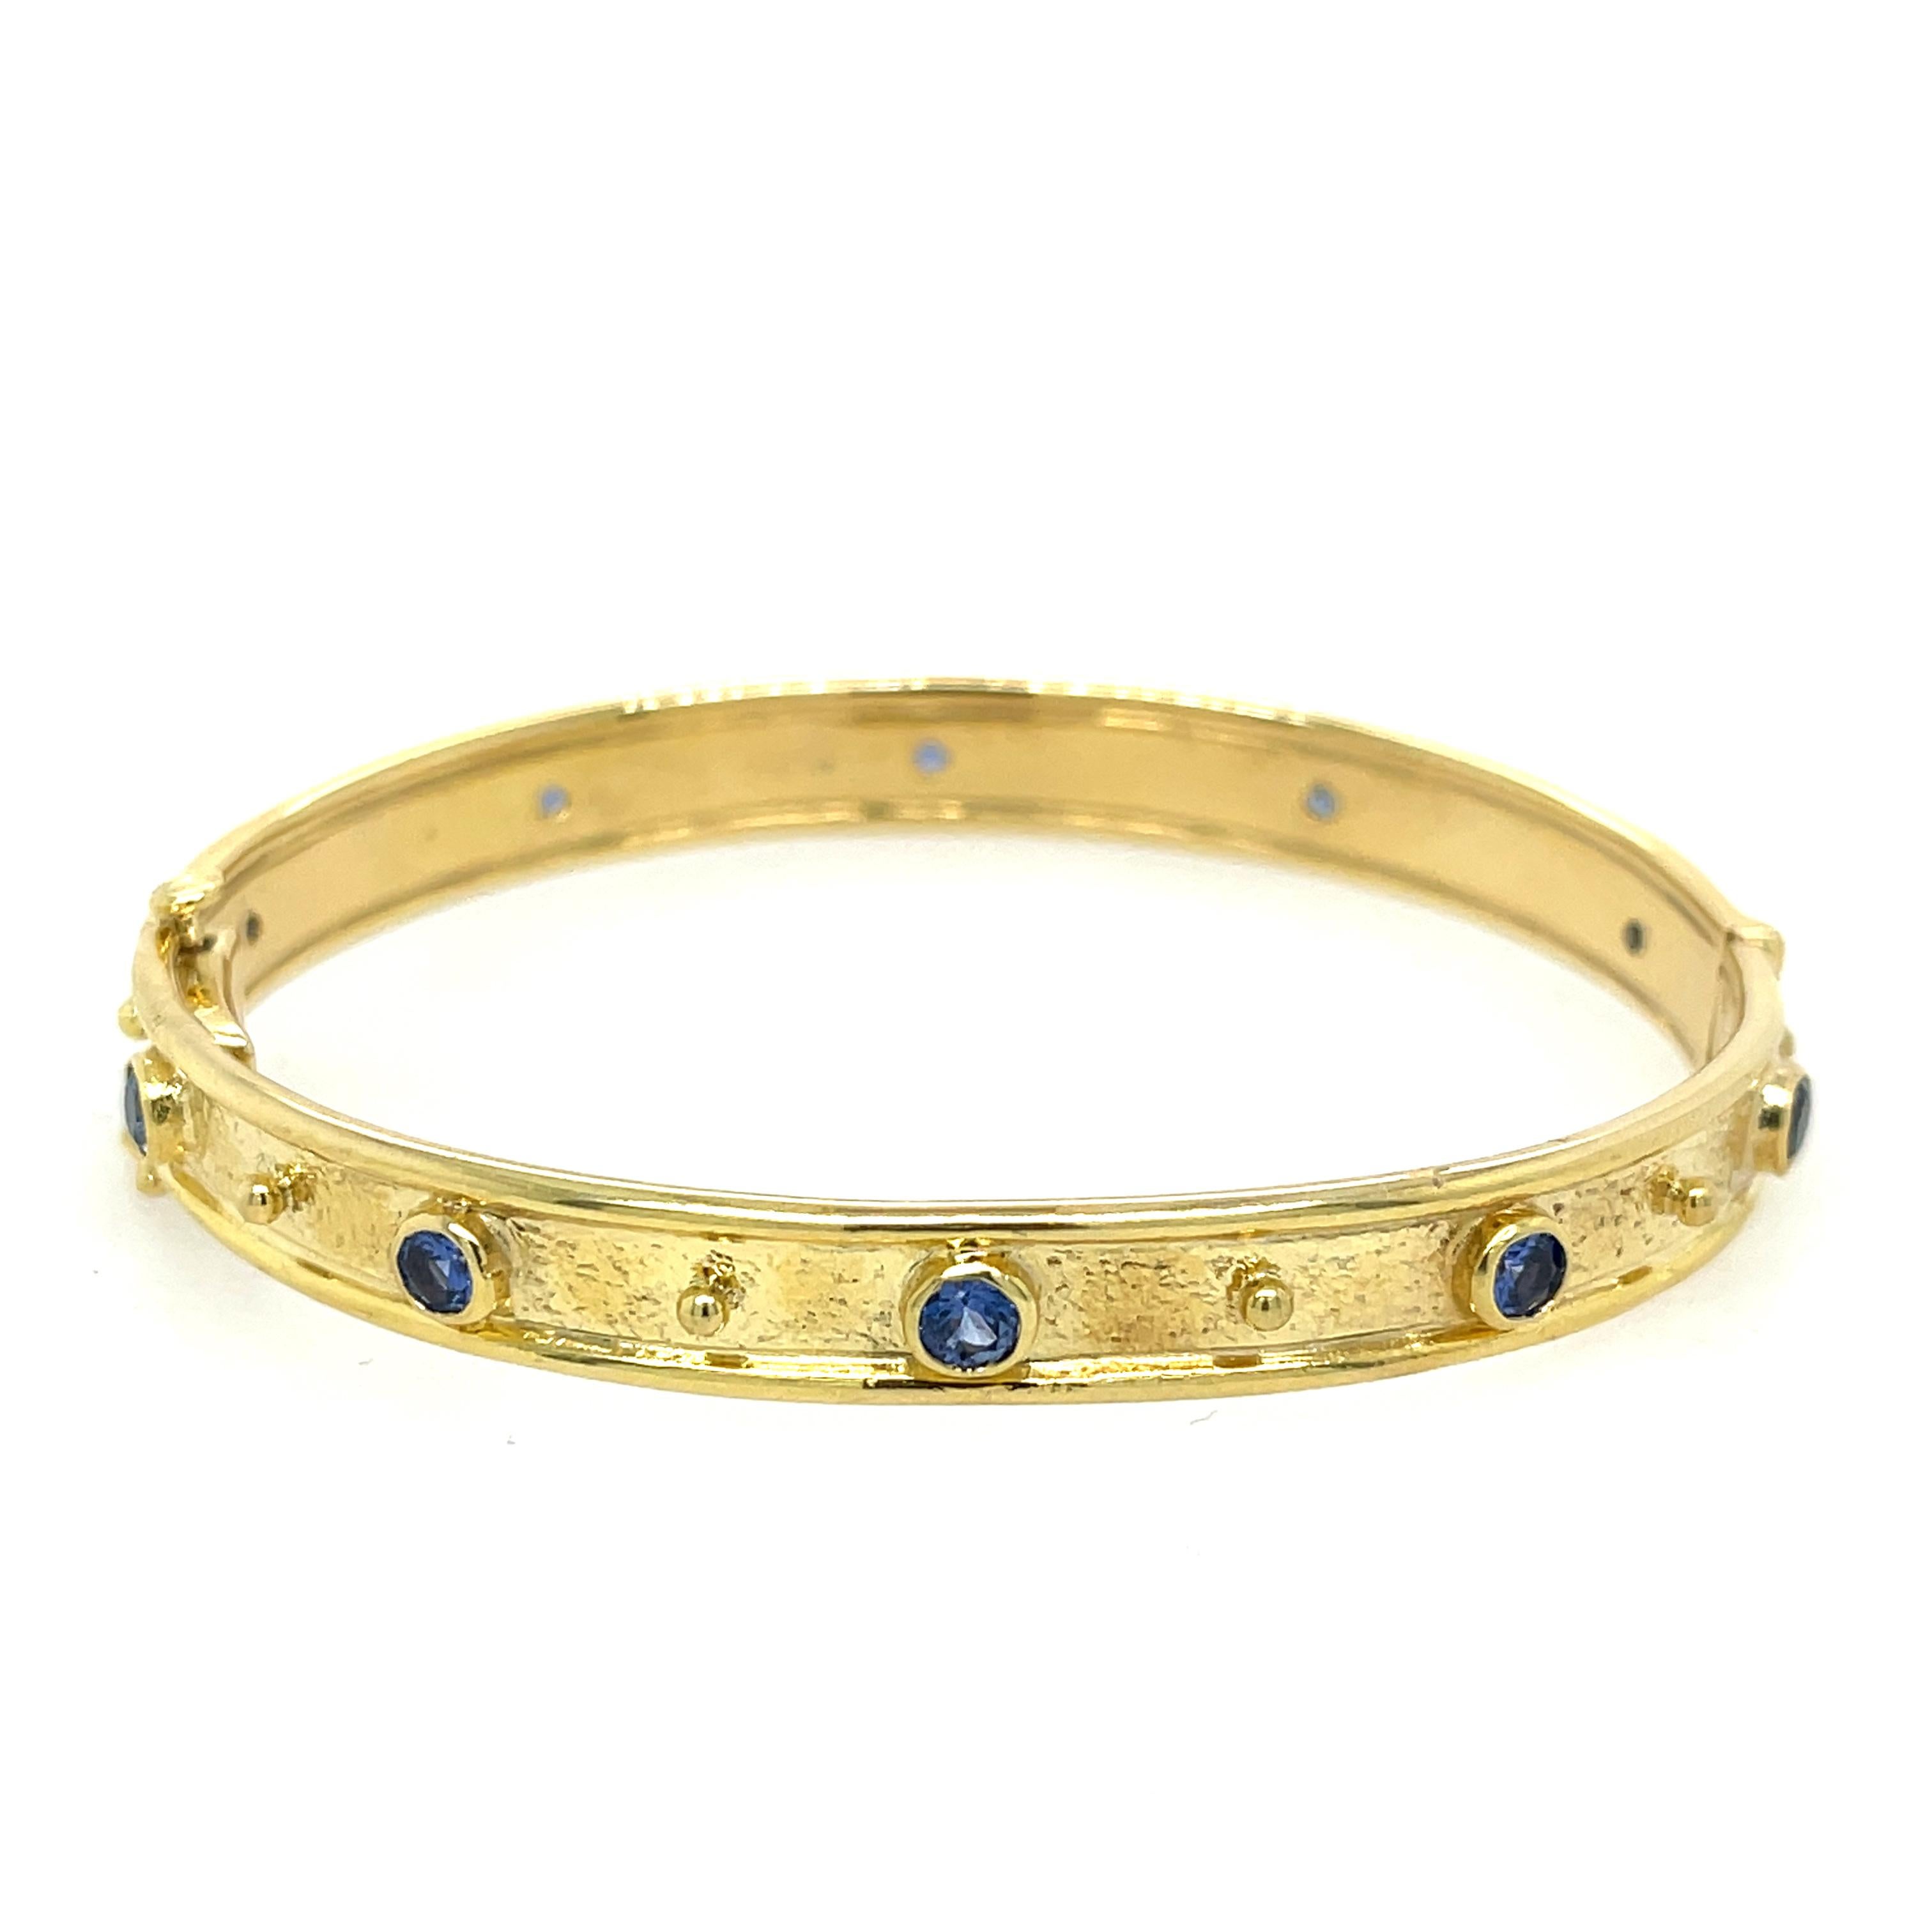 Mazza 14K Sapphire Hammered Bangle. The Bangle Features 10 Round Blue Sapphires.
7.3mm Wide
21.2 Grams